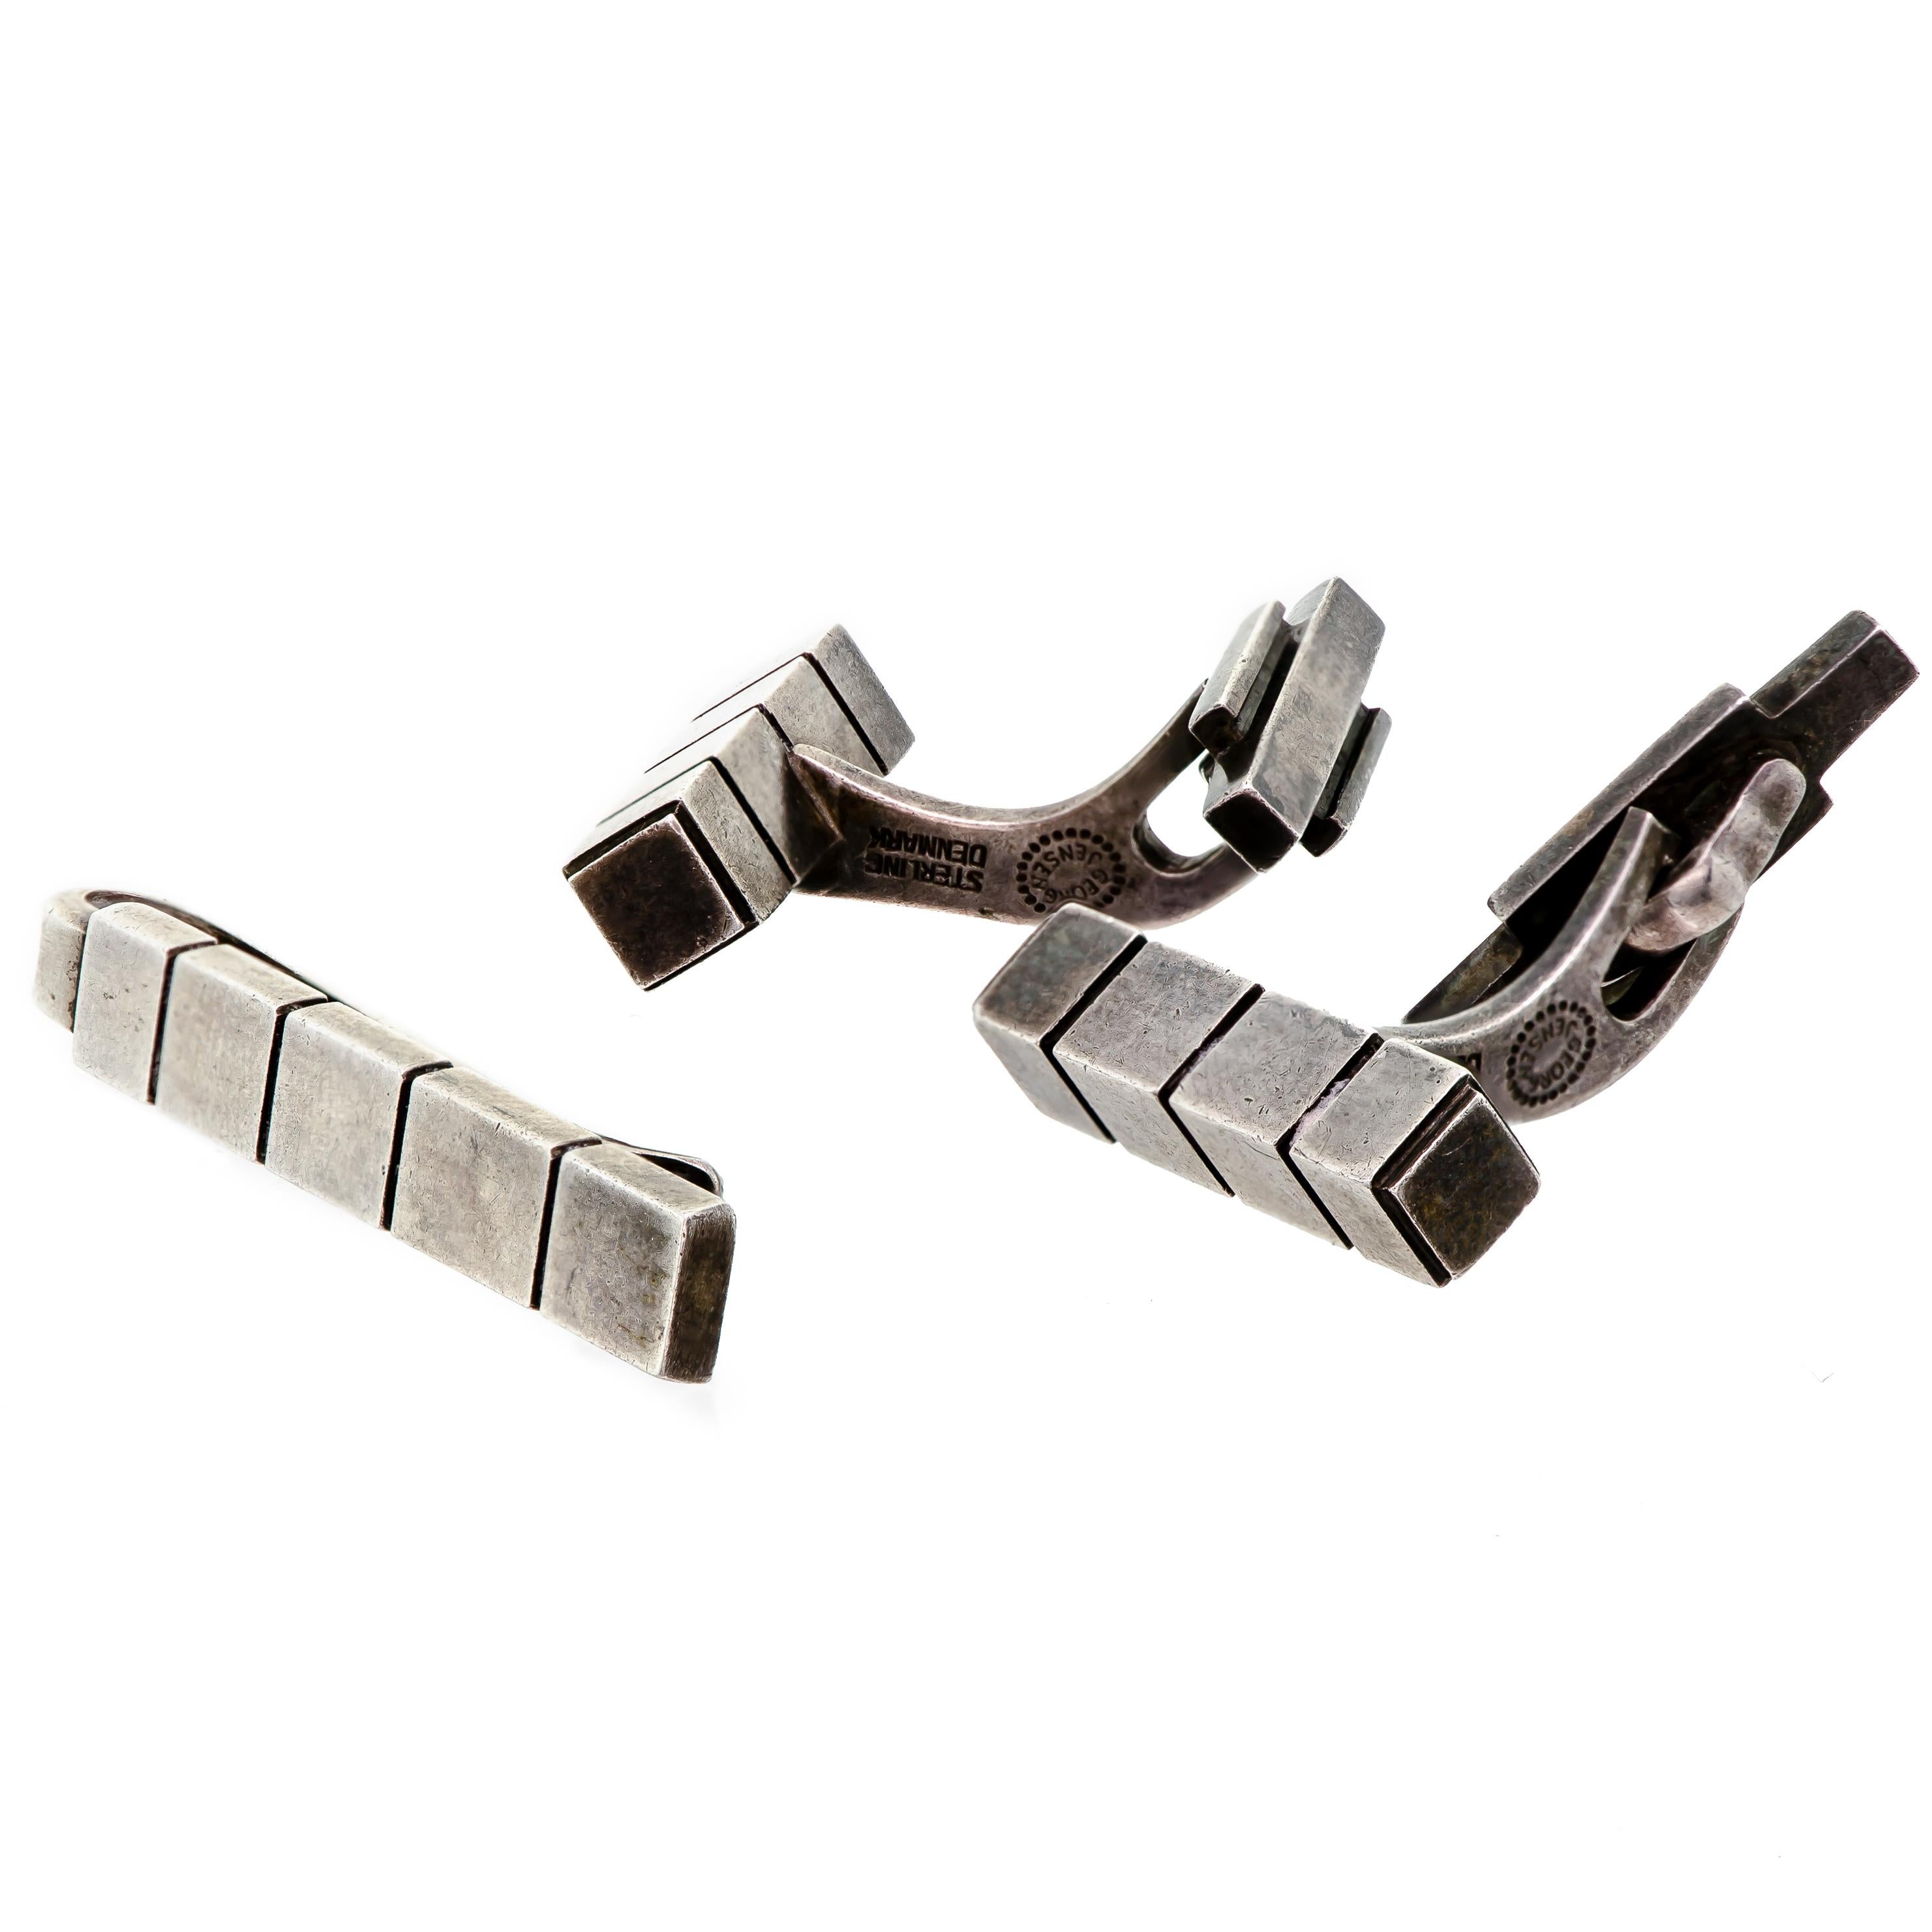 Indulge in the sophisticated charm of the Georg Jensen Mid-Century Cufflinks and Tie Bar Set, a meticulously crafted accessory from the 1960s. This set boasts a striking mid-century design that exudes elegance and refinement. Its sterling silver